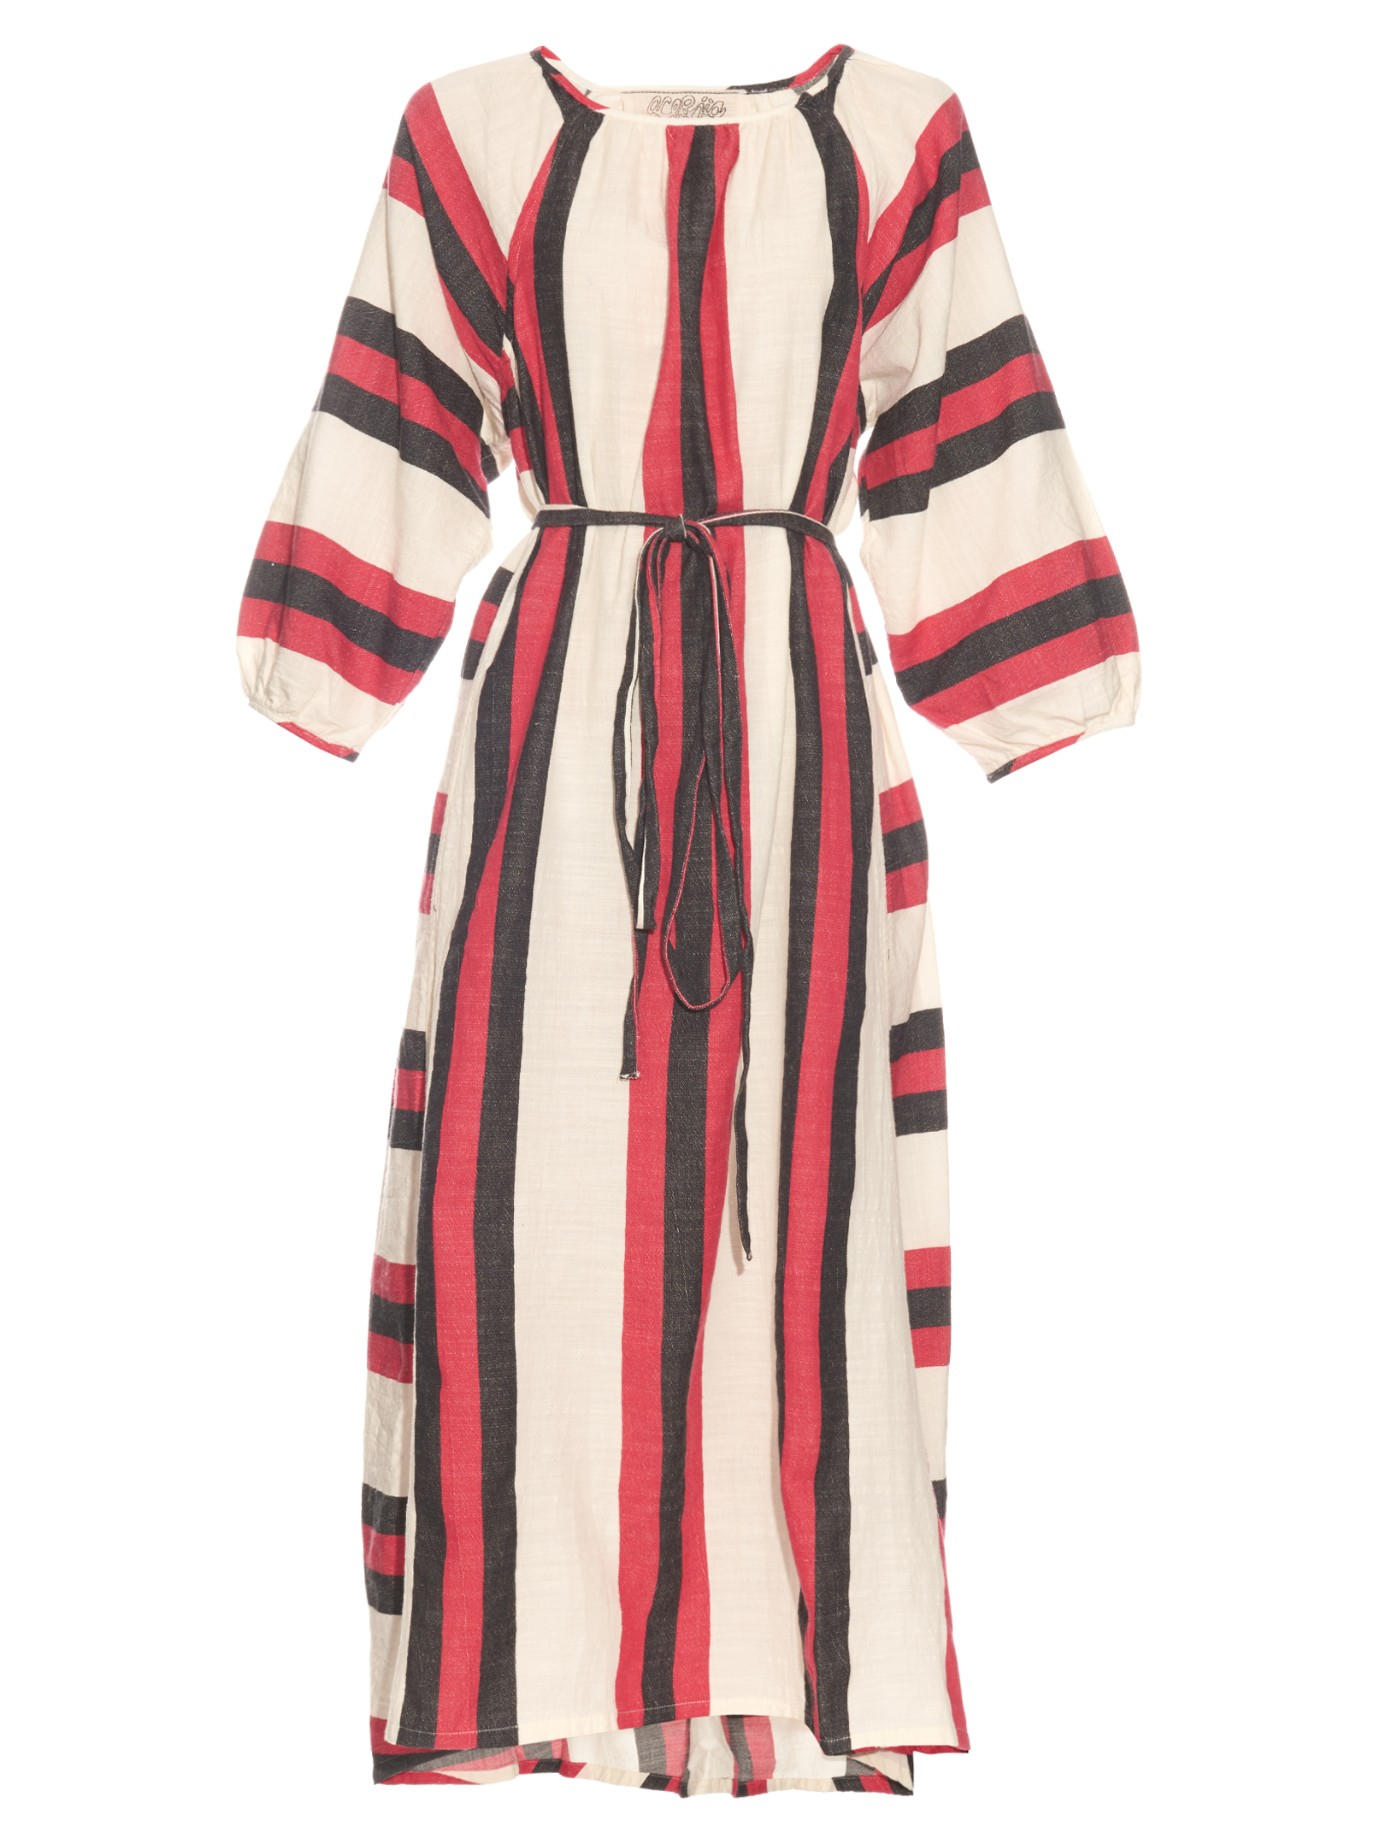 Ace & Jig Heather Striped Cotton Dress in Red White (Red) - Lyst